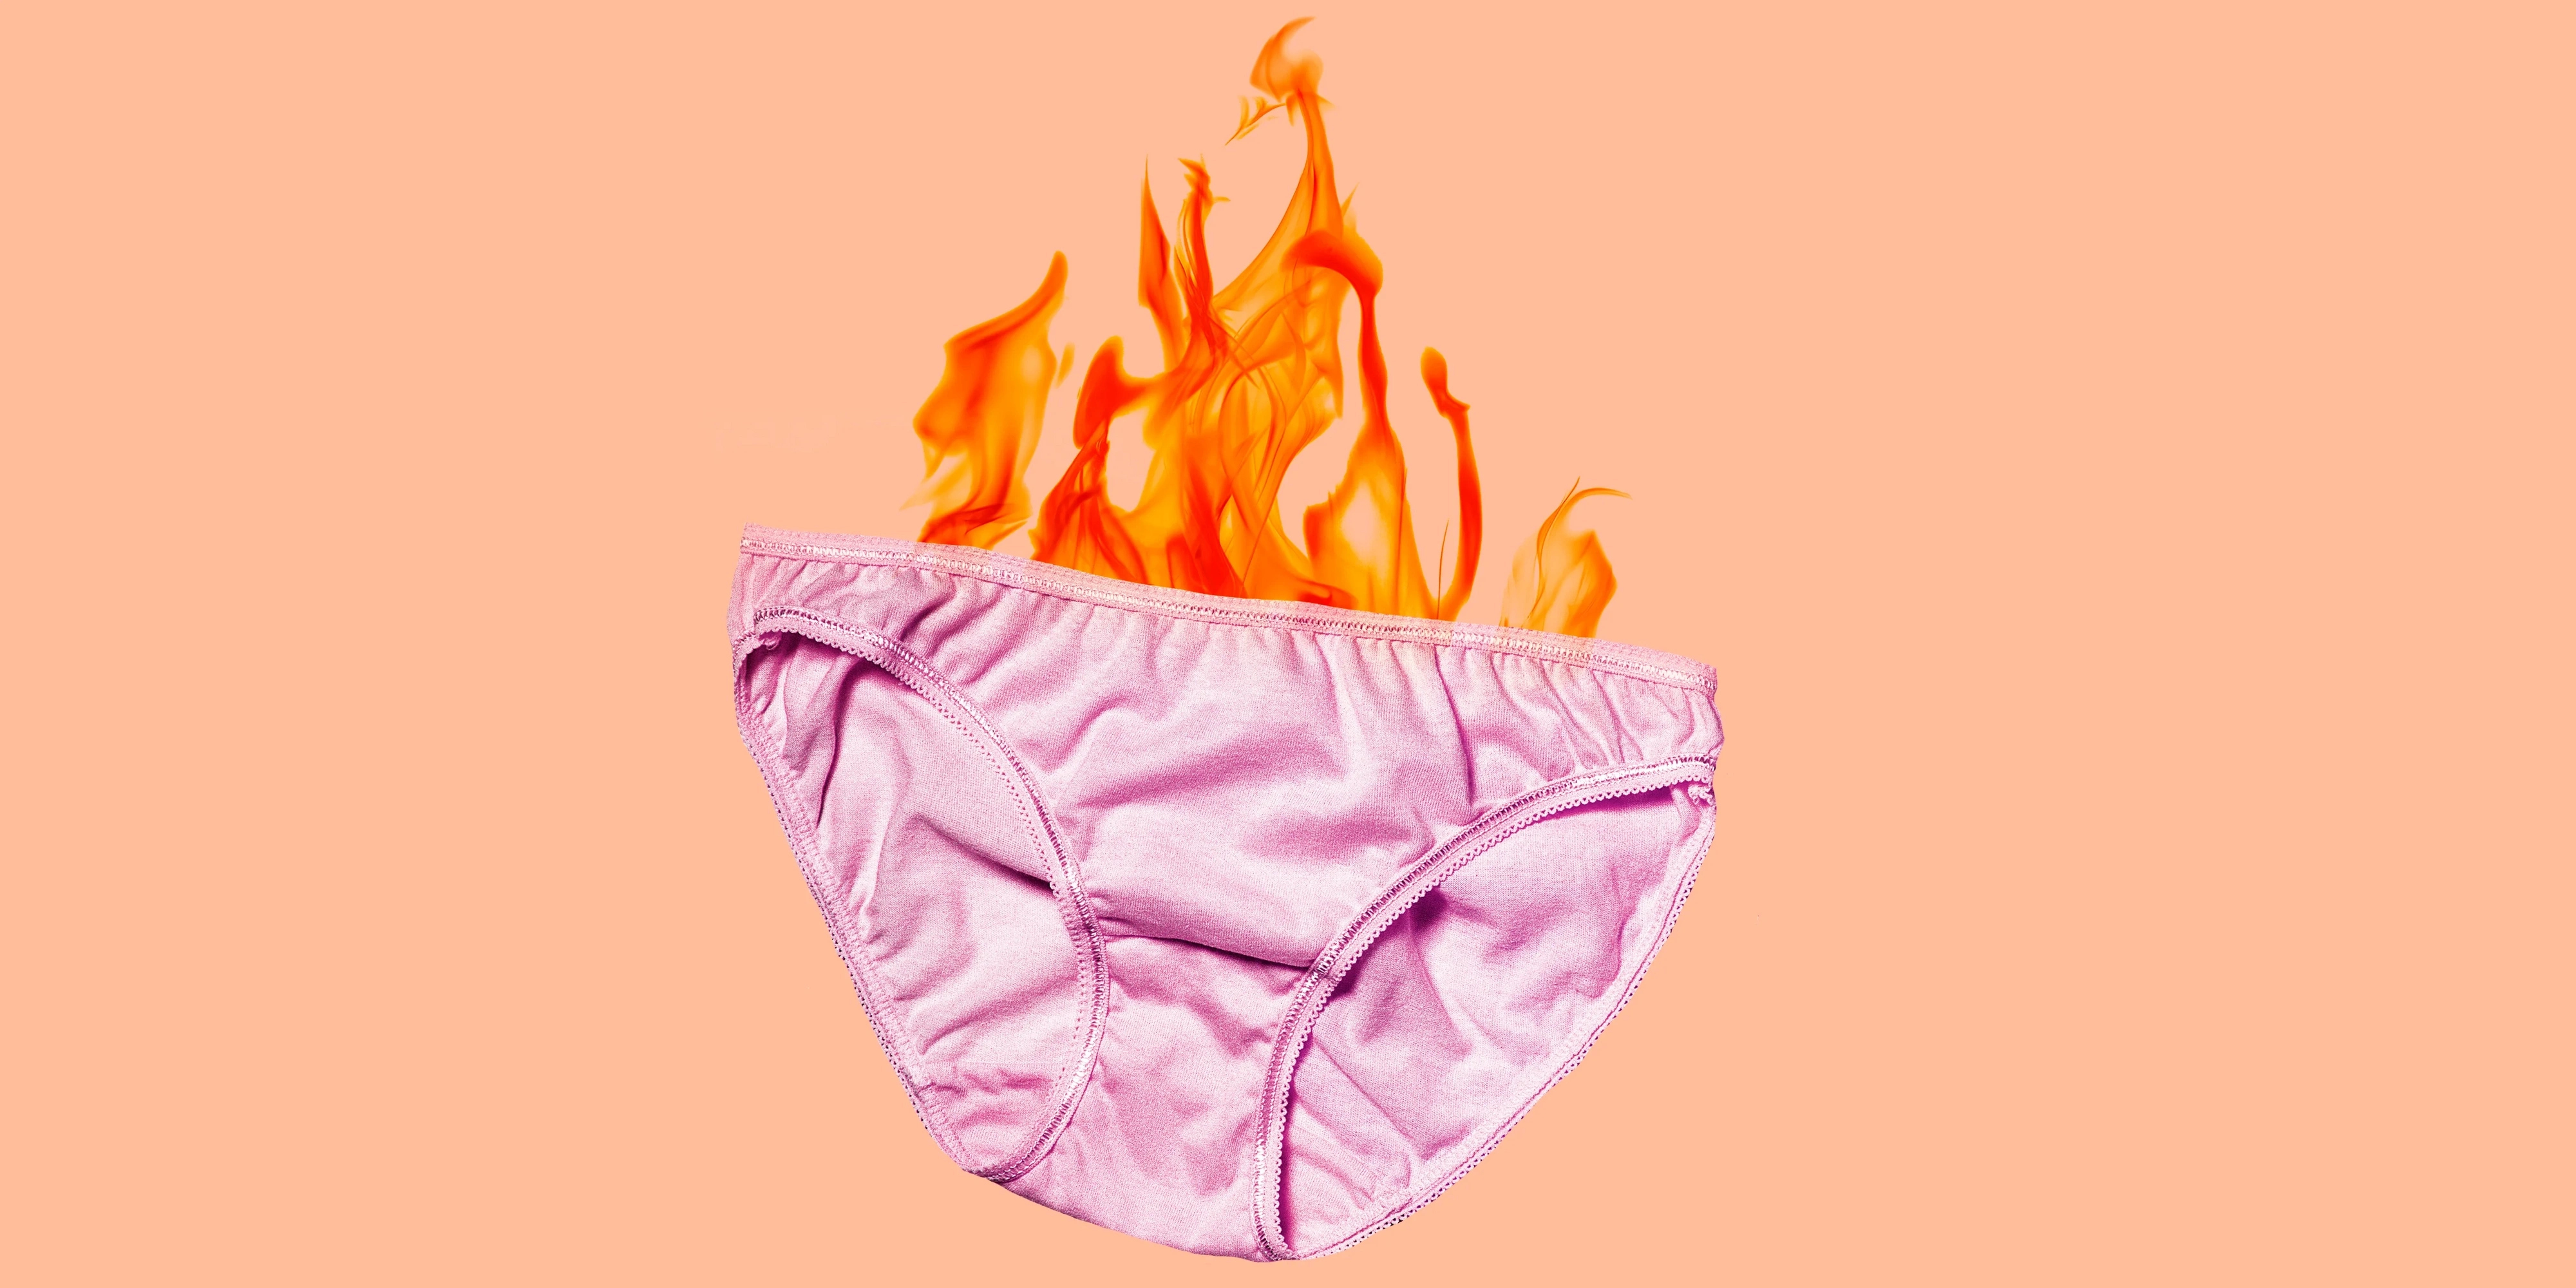 Causes of burning in the Vagina